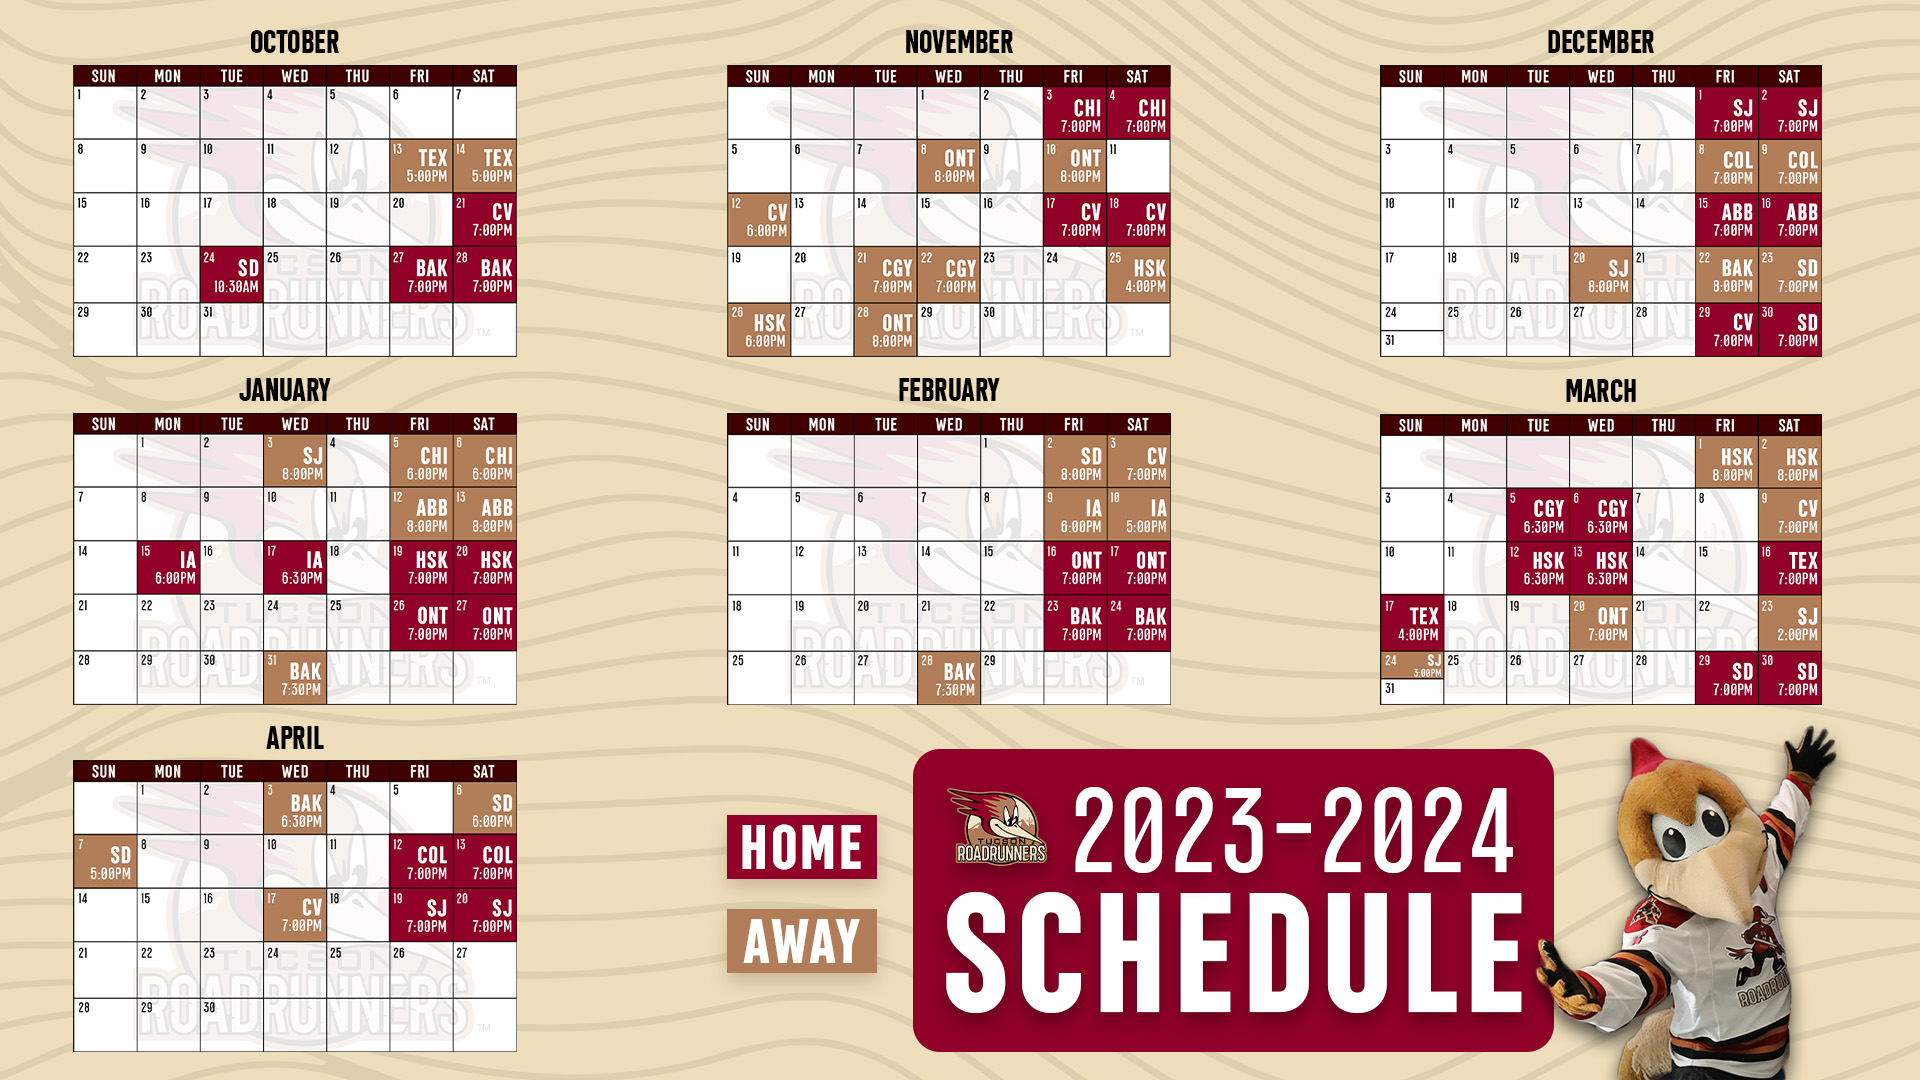 Roadrunners Announce 20232024 Schedule